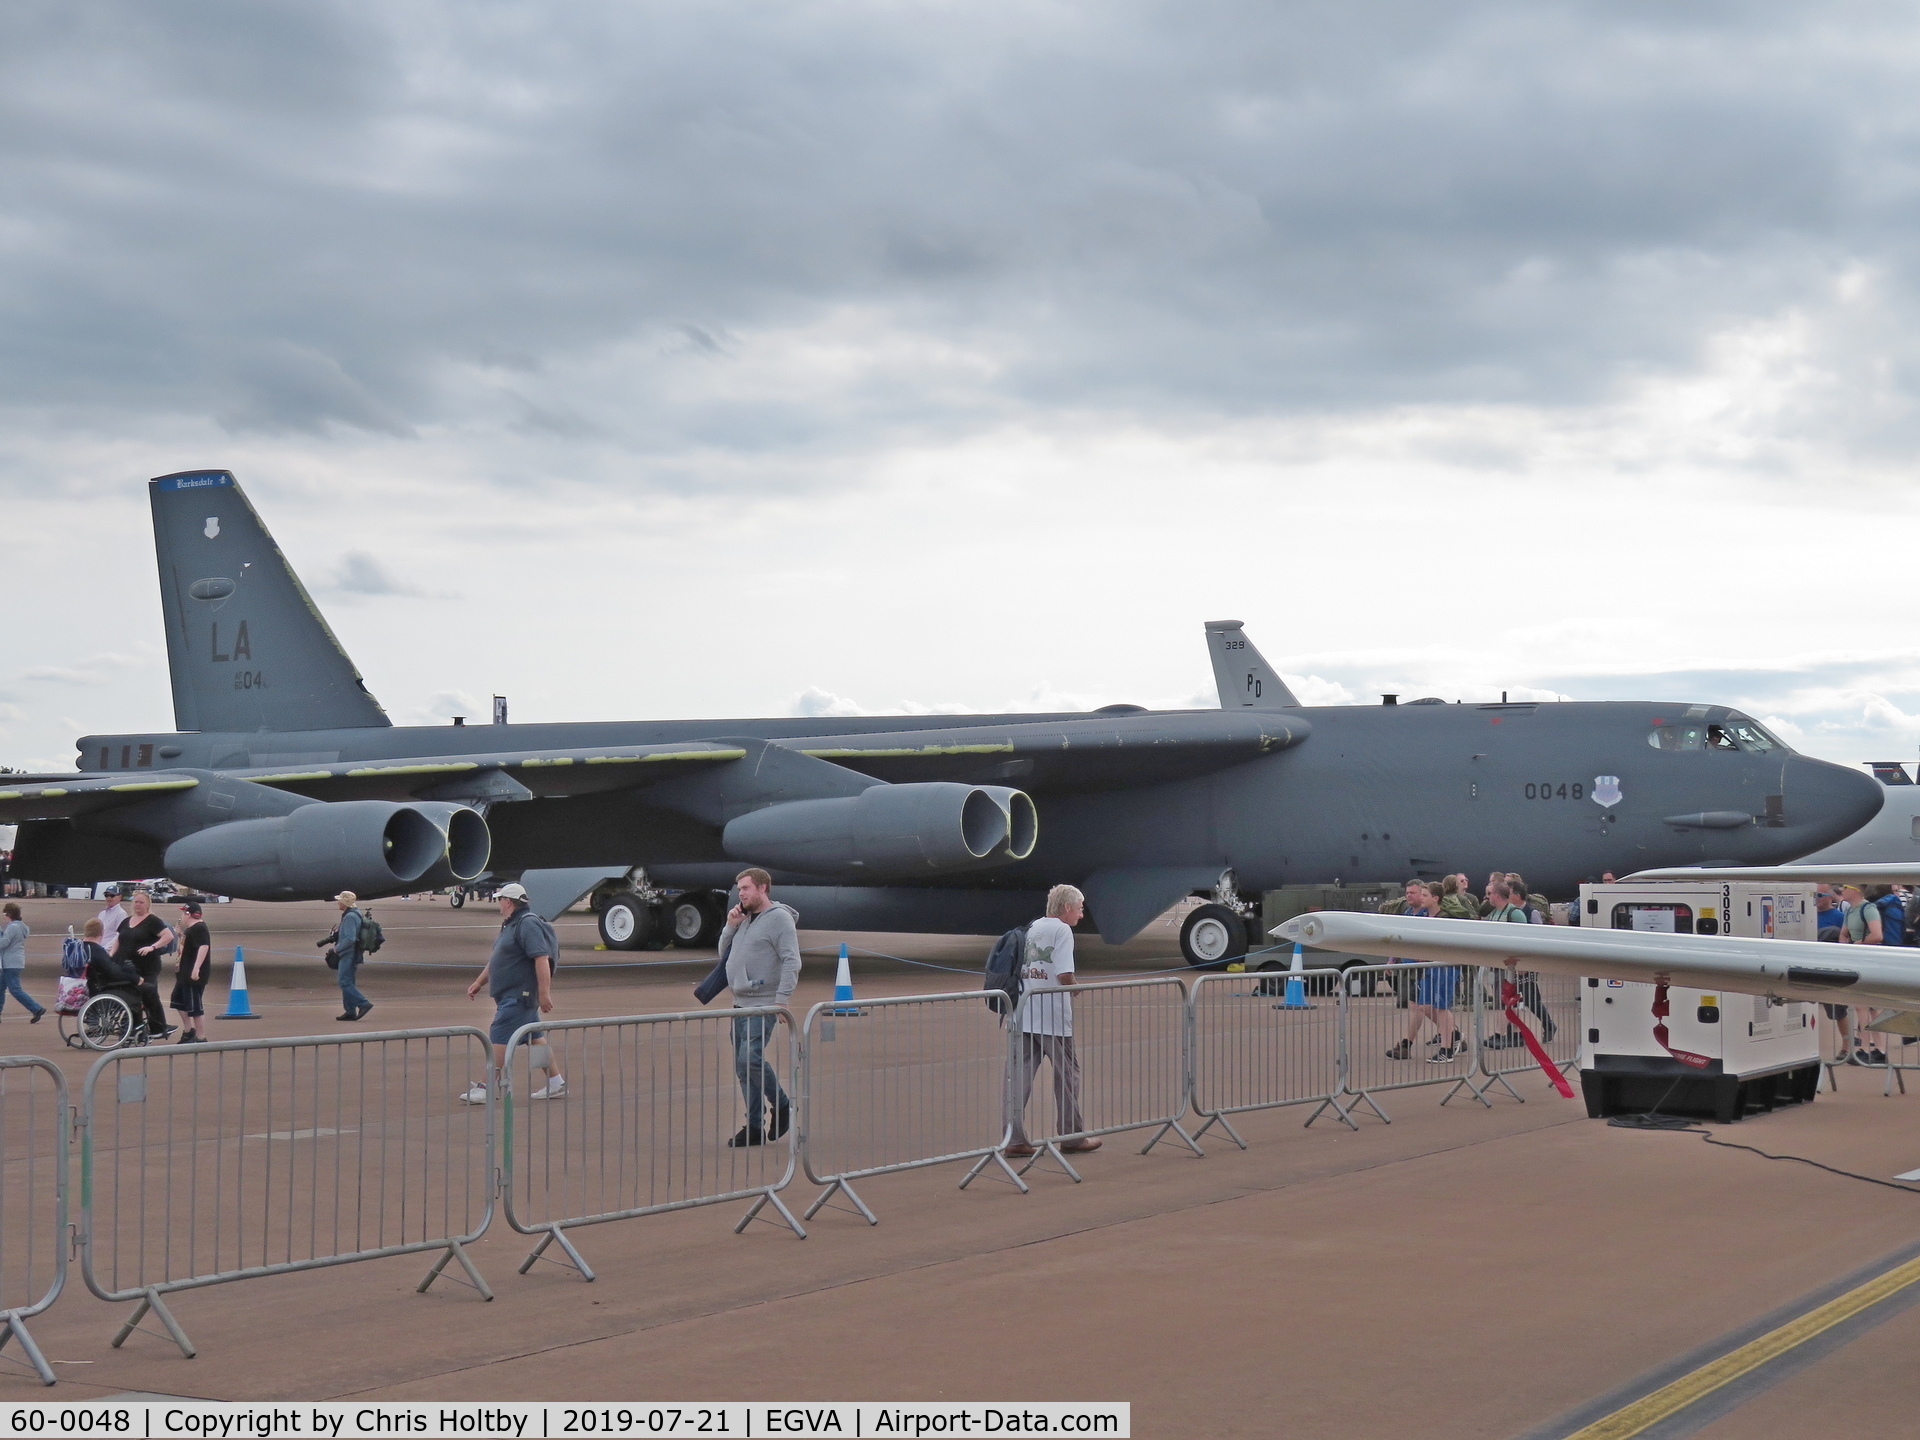 60-0048, 1960 Boeing B-52H Stratofortress C/N 464413, On static display at RIAT 2019 at RAF Fairford